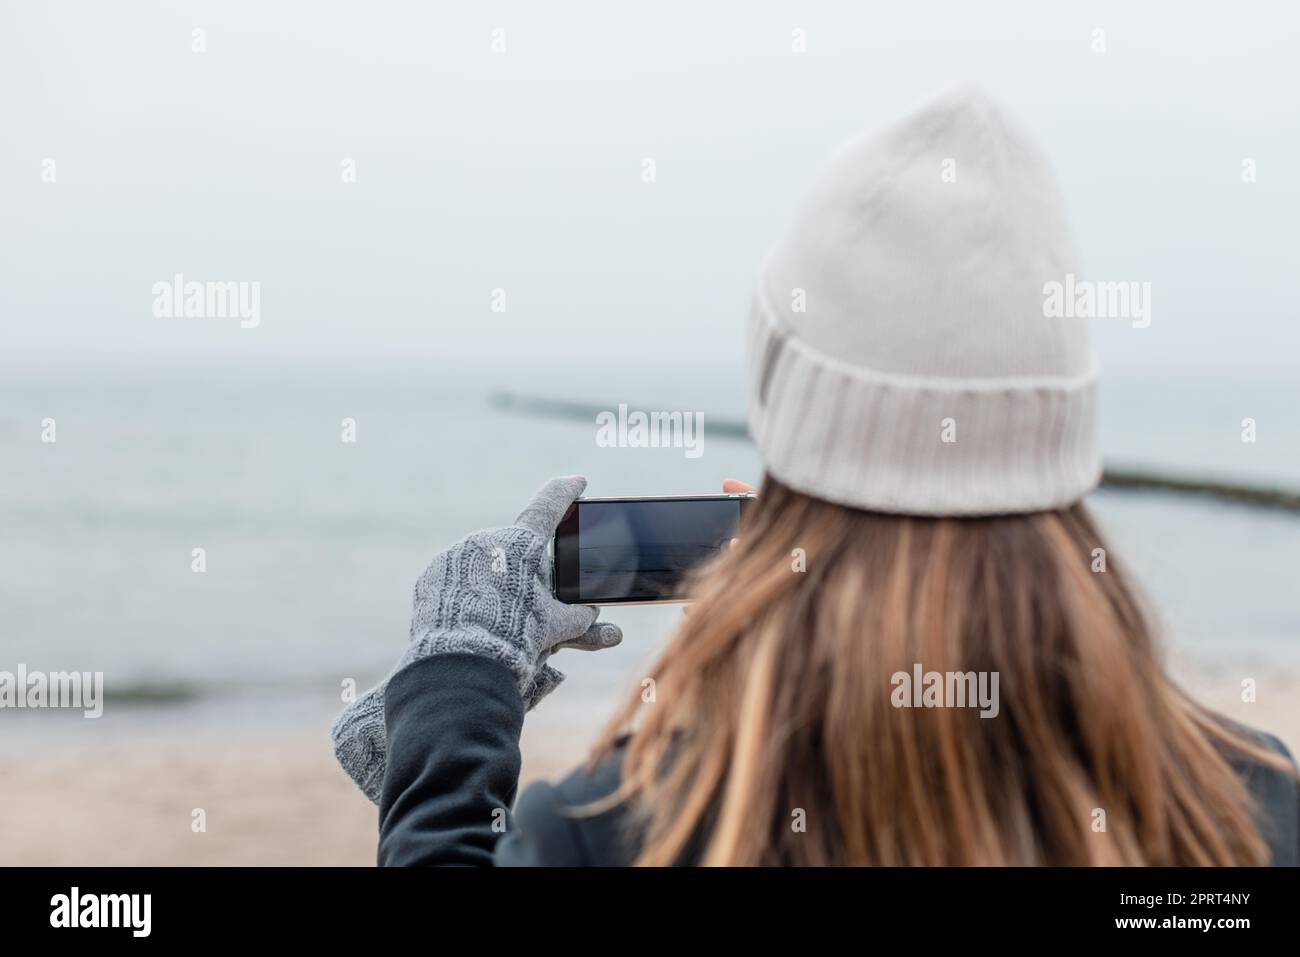 Woman taking picture on beach in winter with phone Stock Photo